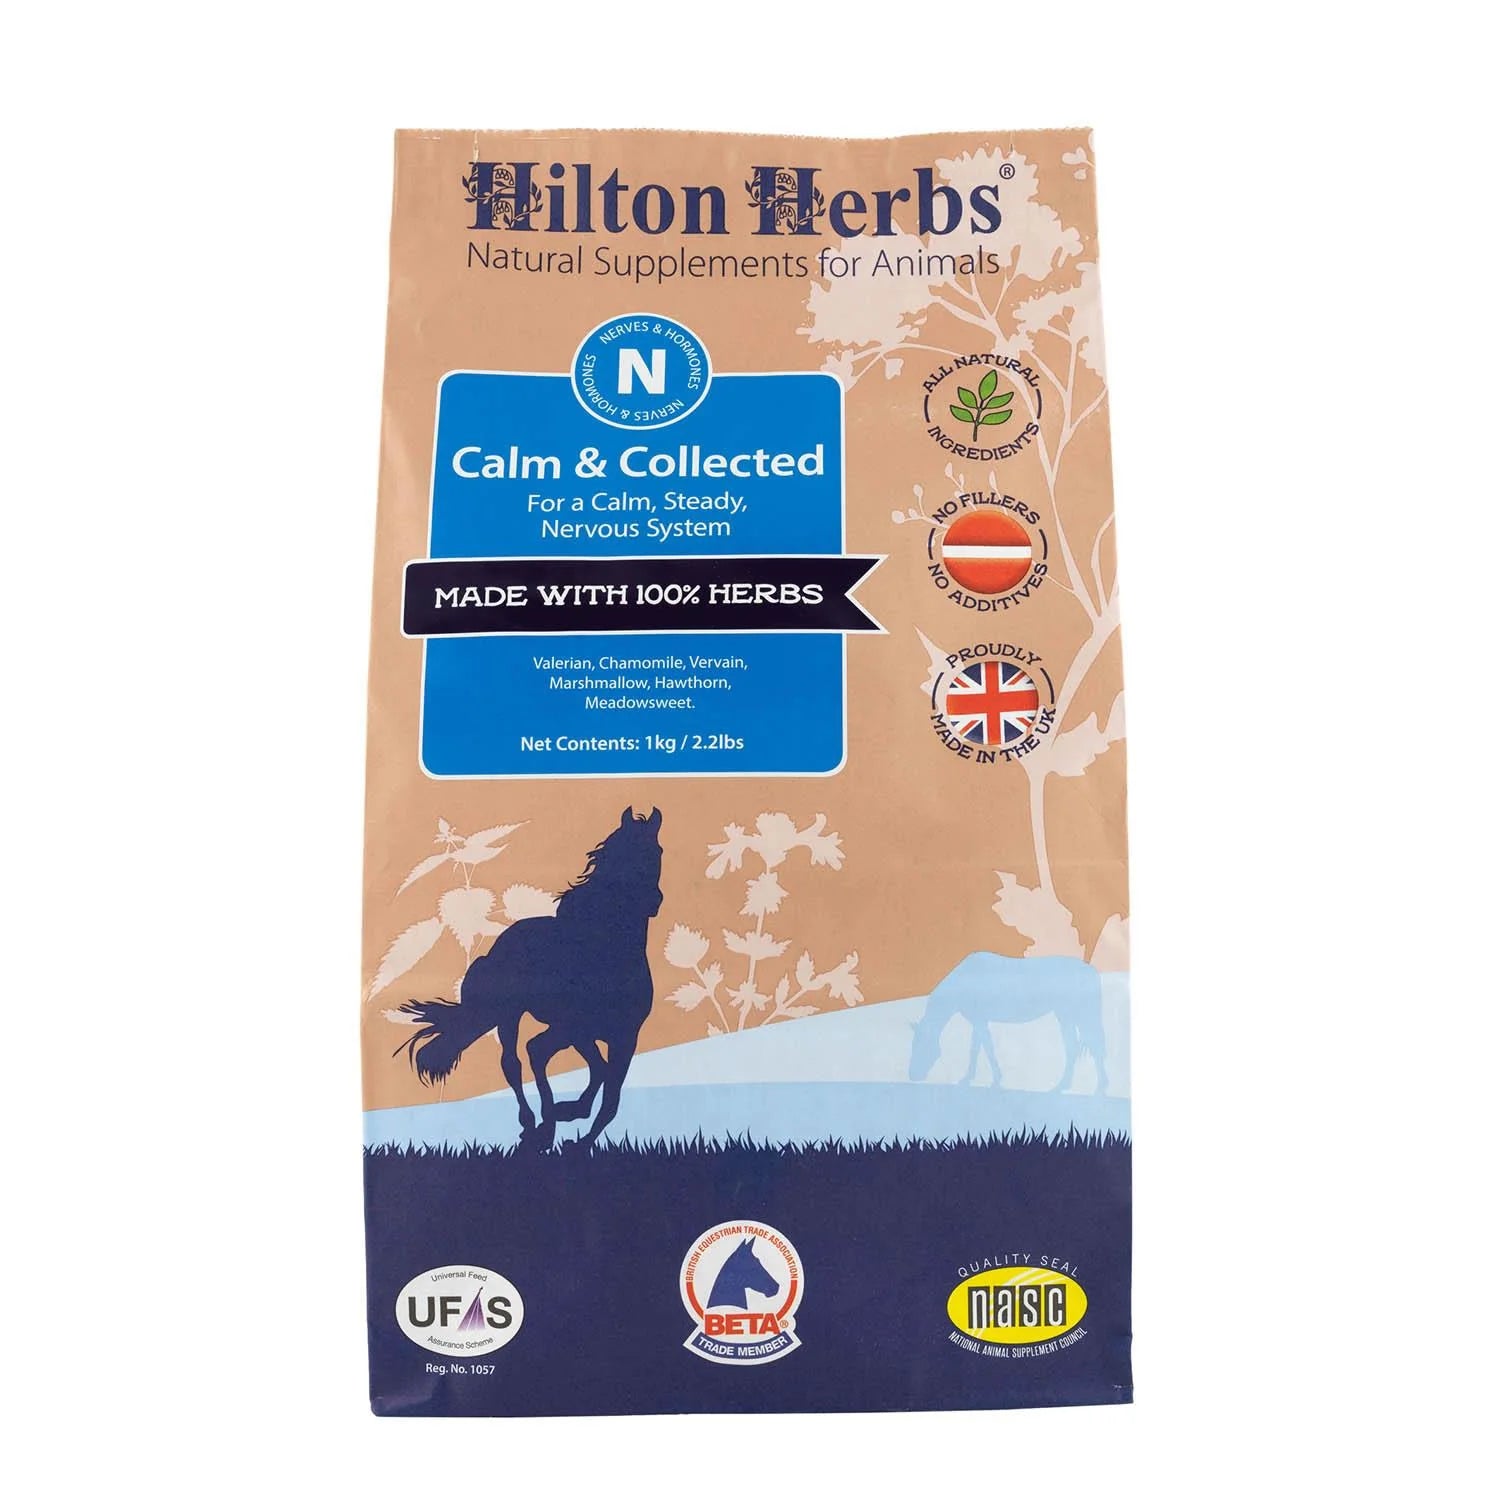 Hilton Herbs Calm & Collected - Just Horse Riders